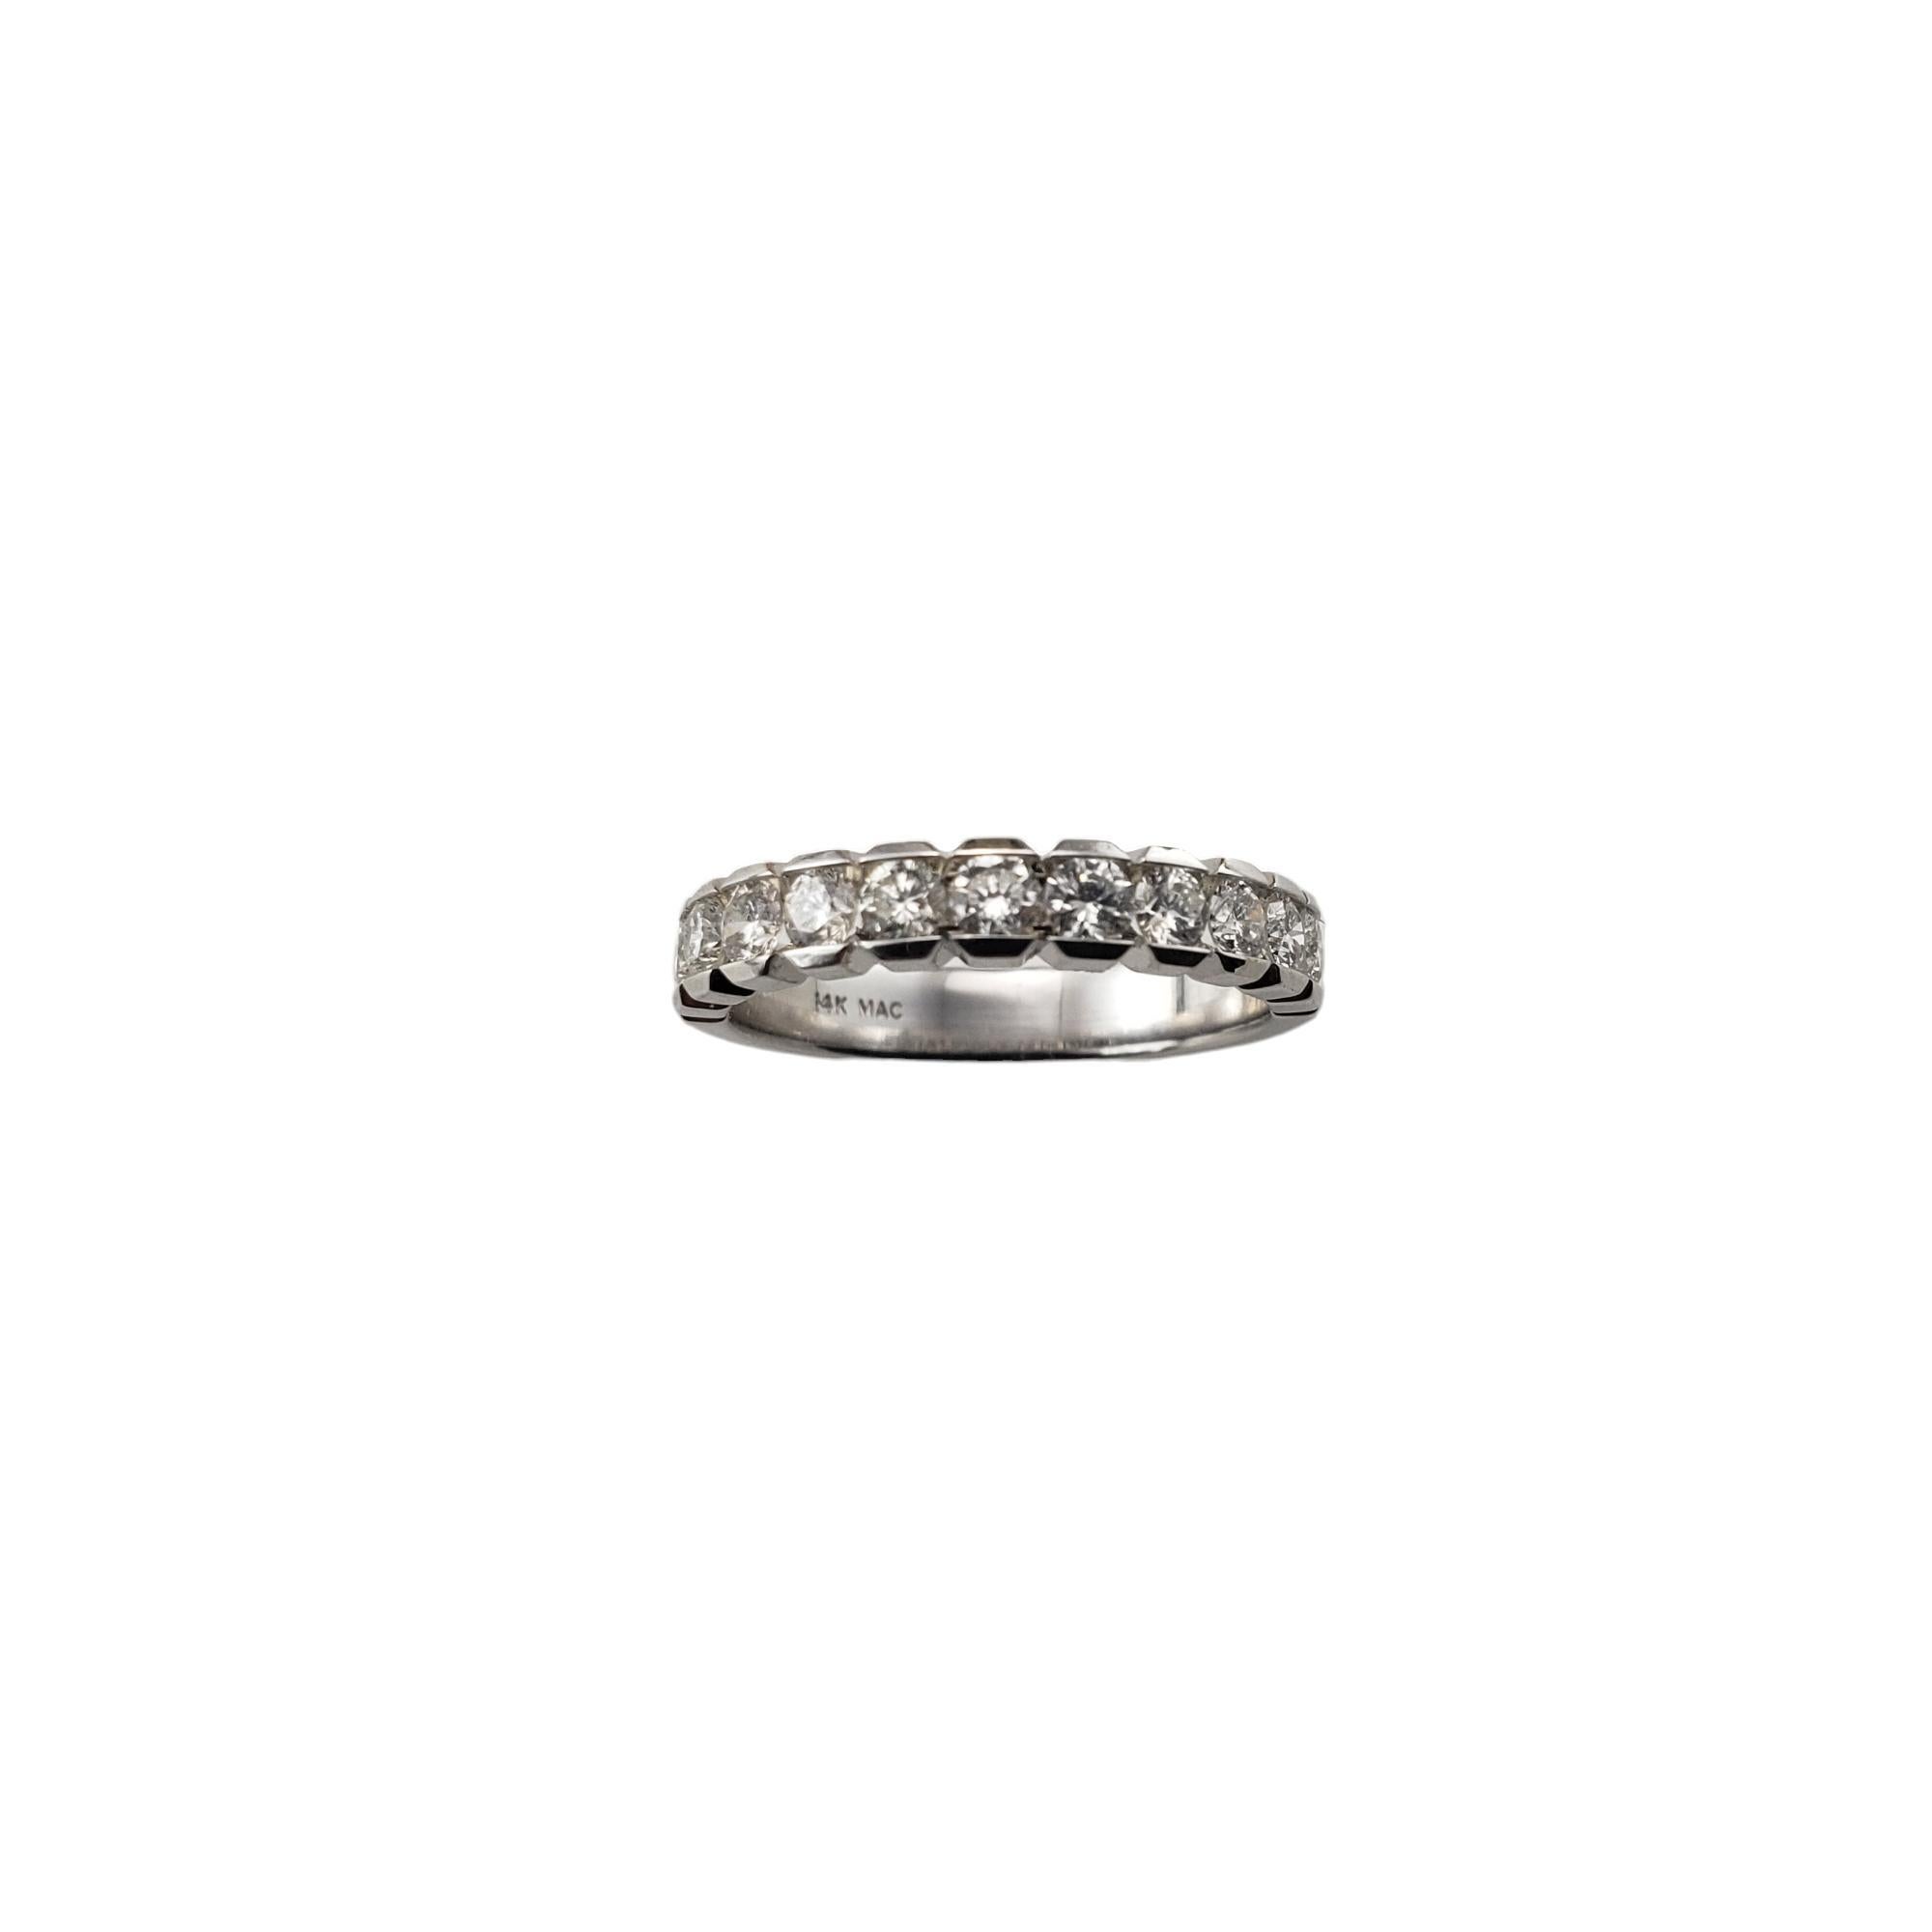 Vintage 14 Karat White Gold and Diamond Band Ring size 7-

This sparkling band features 11 round brilliant cut diamonds set in classic 14K white gold.  Width:  3.8 mm.

Approximate total diamond weight:   .77 ct.

Diamond clarity:  SI1-I1

Diamond